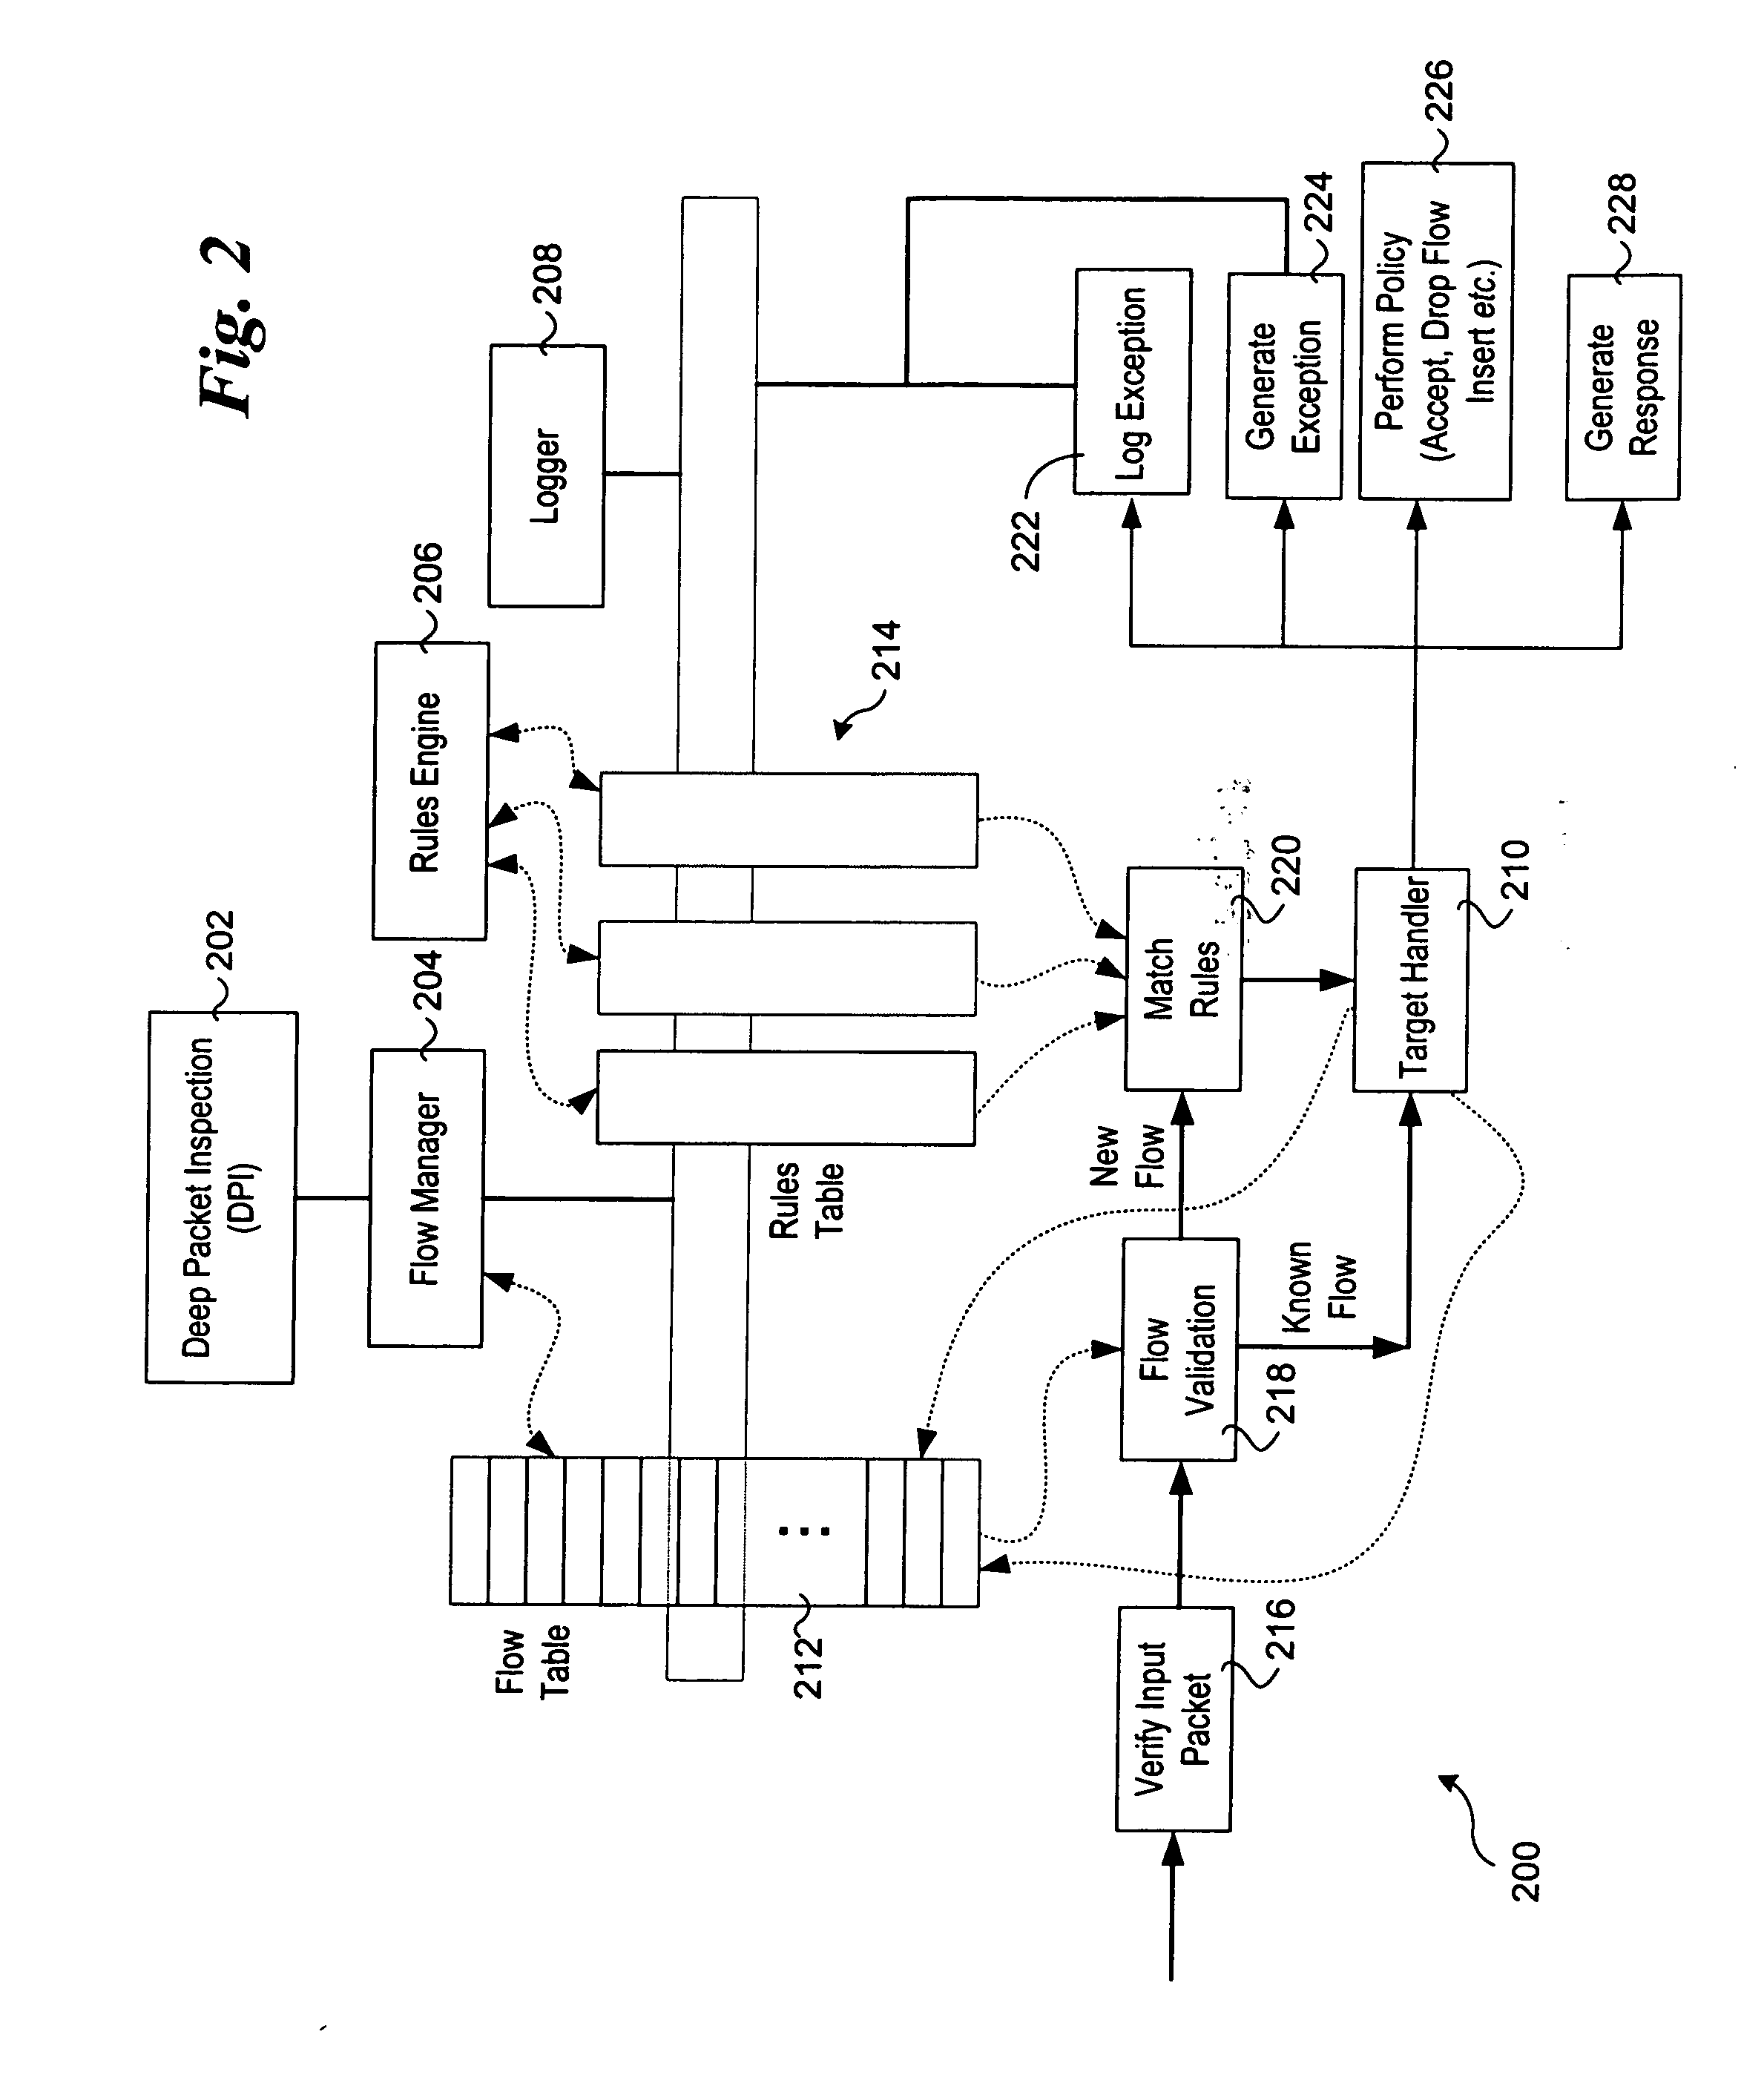 Multi-pattern packet content inspection mechanisms employing tagged values